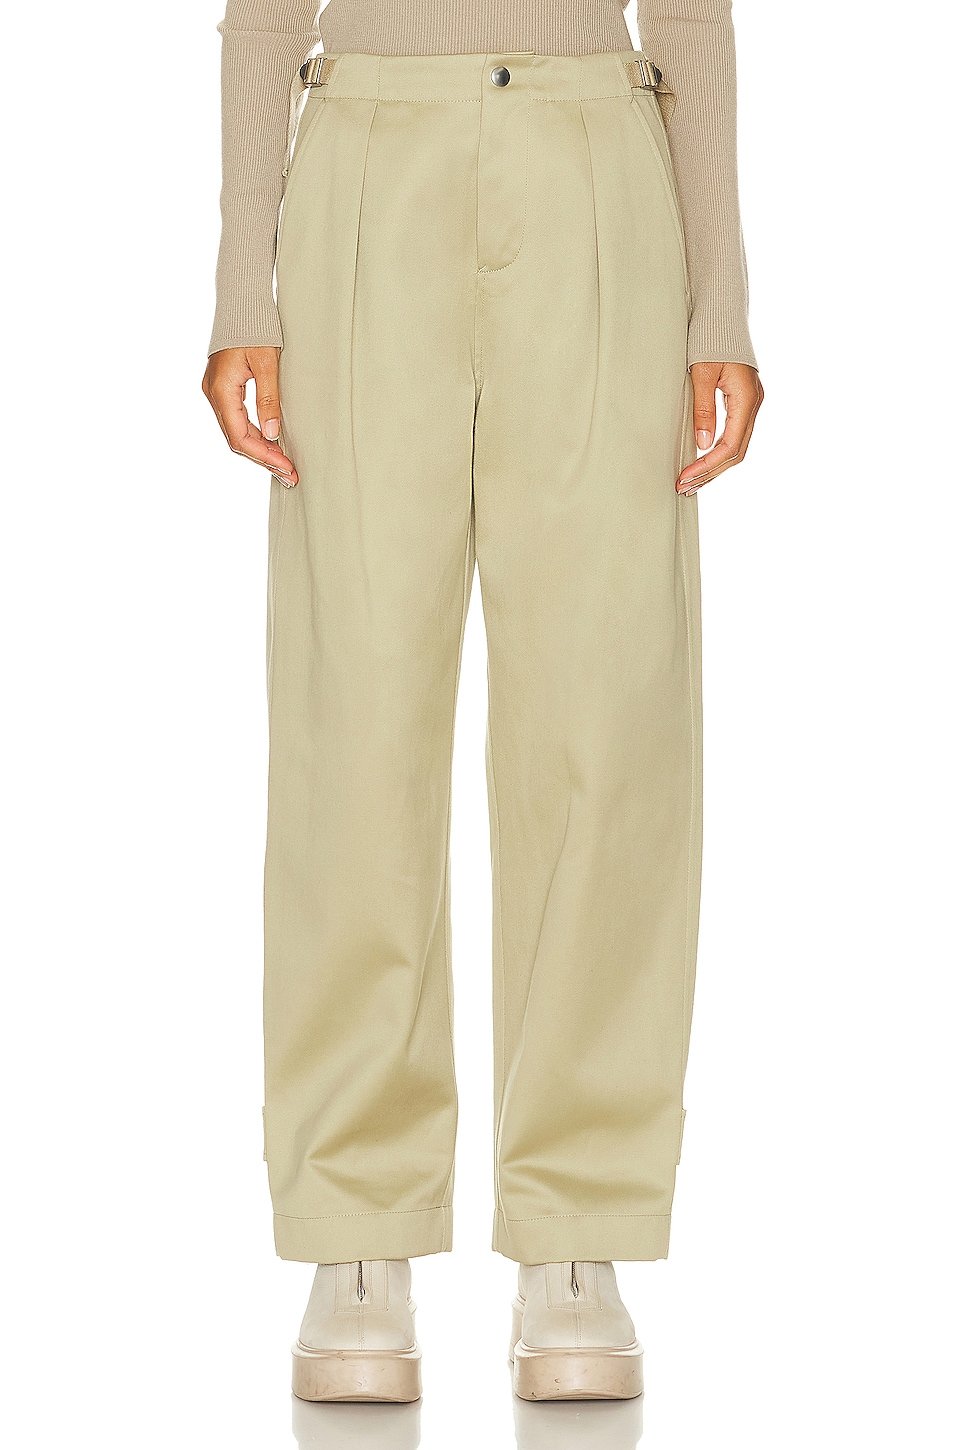 Image 1 of Burberry Tailored Pant in Hunter